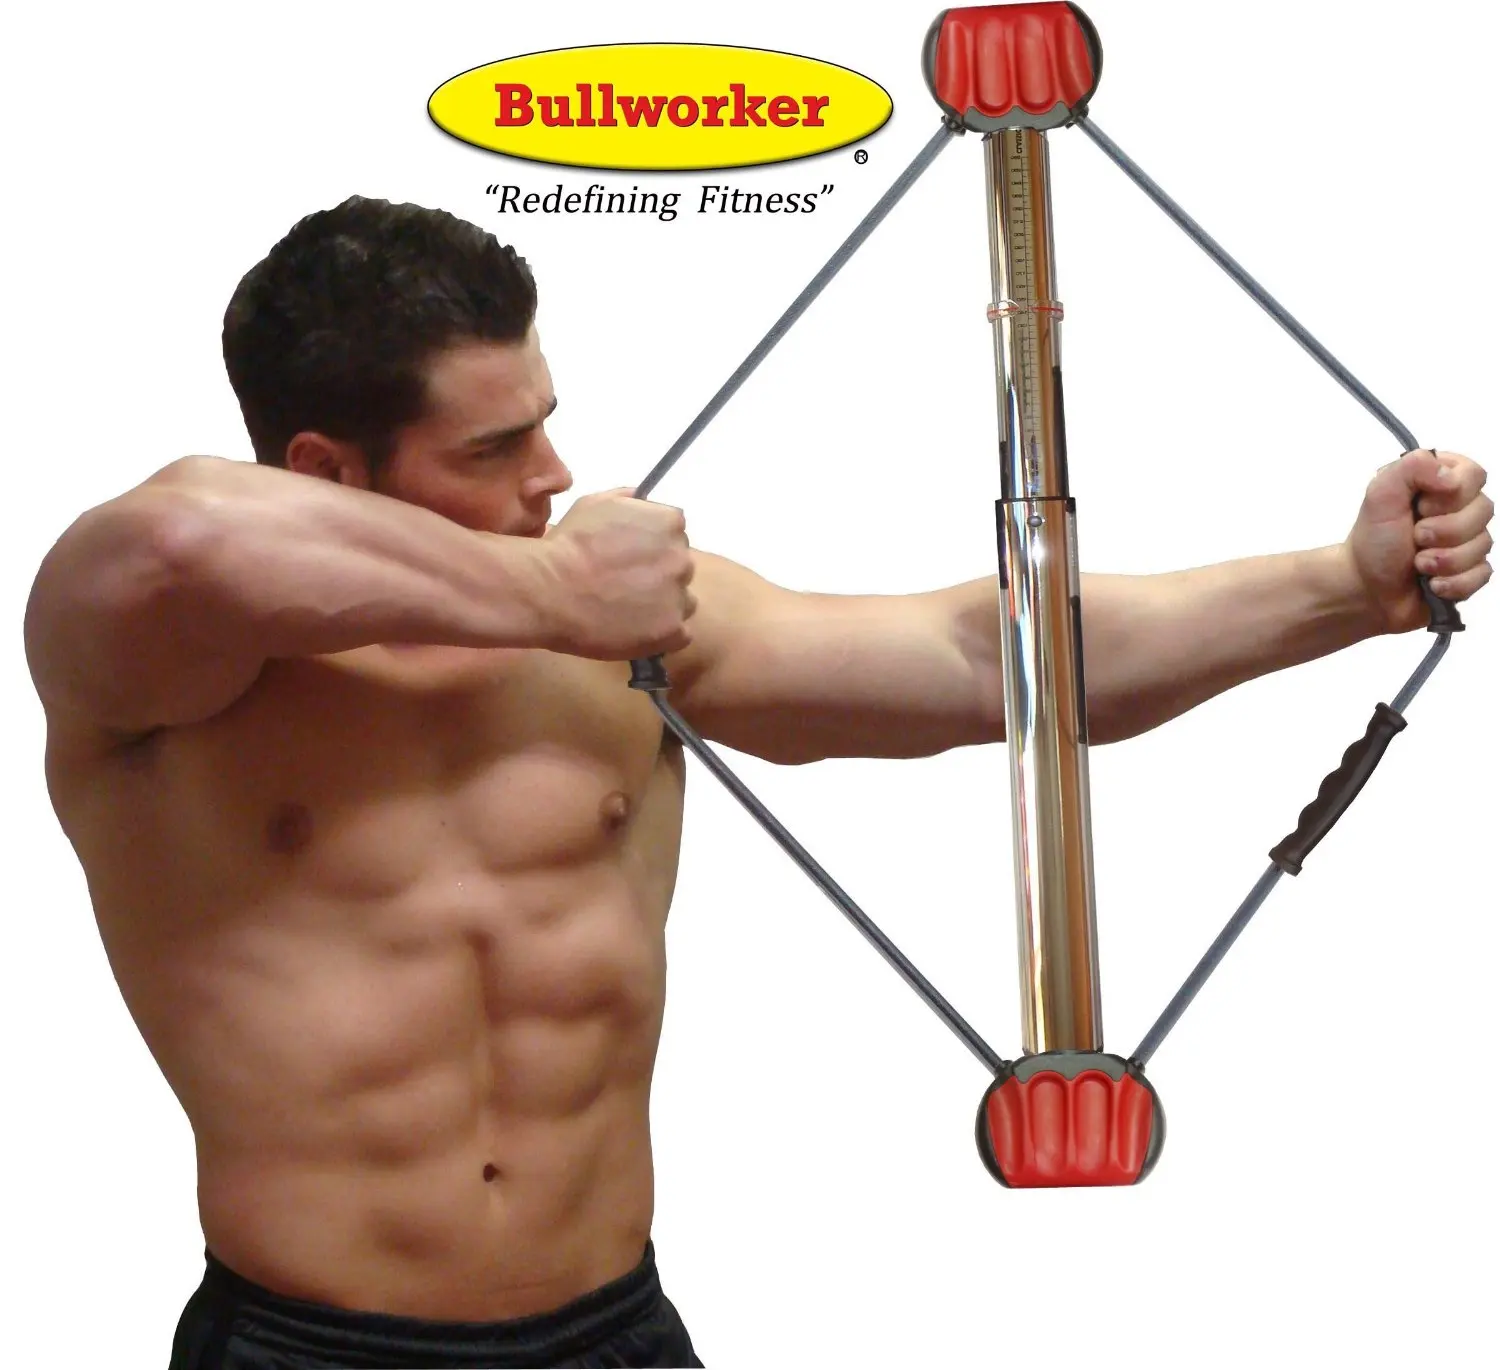 Bullworker Bow Classic Full Body Portable Home Gym Isometric Exercise Equi